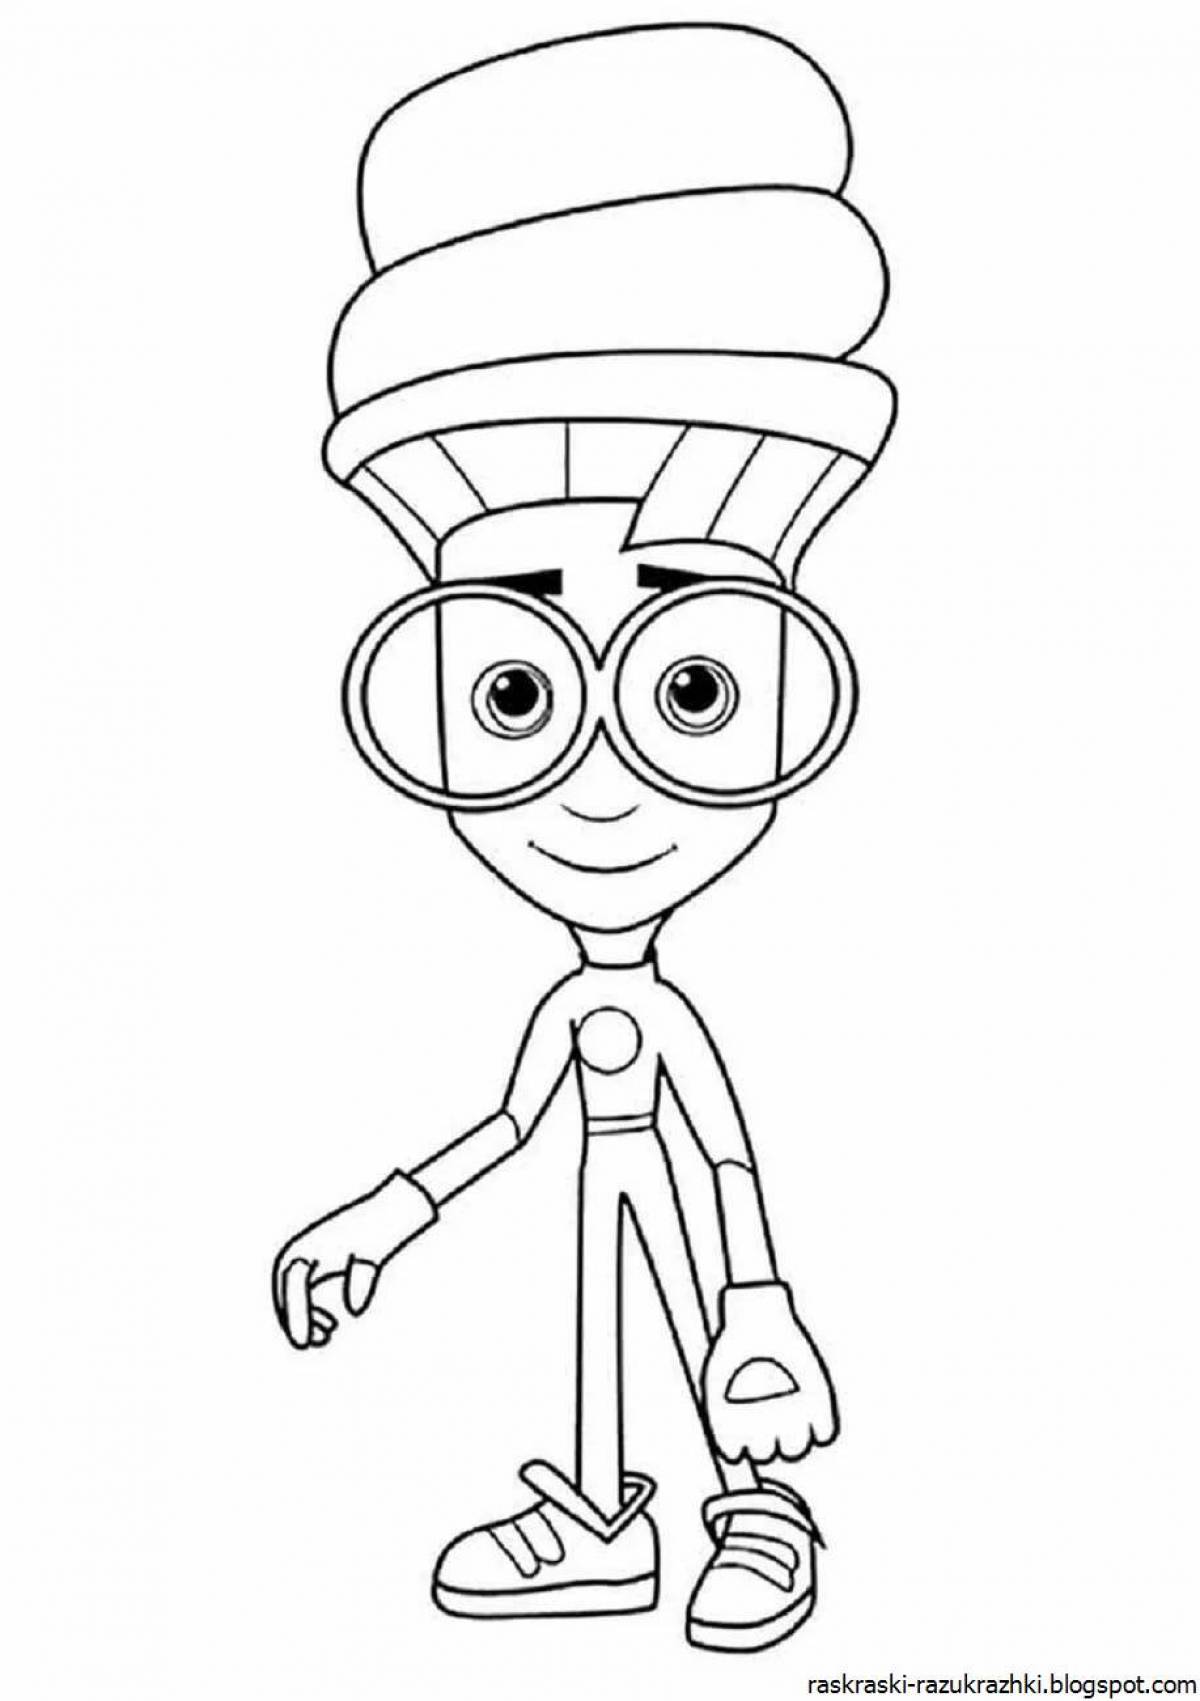 Delightful fixies-coloring pages for children 3-4 years old